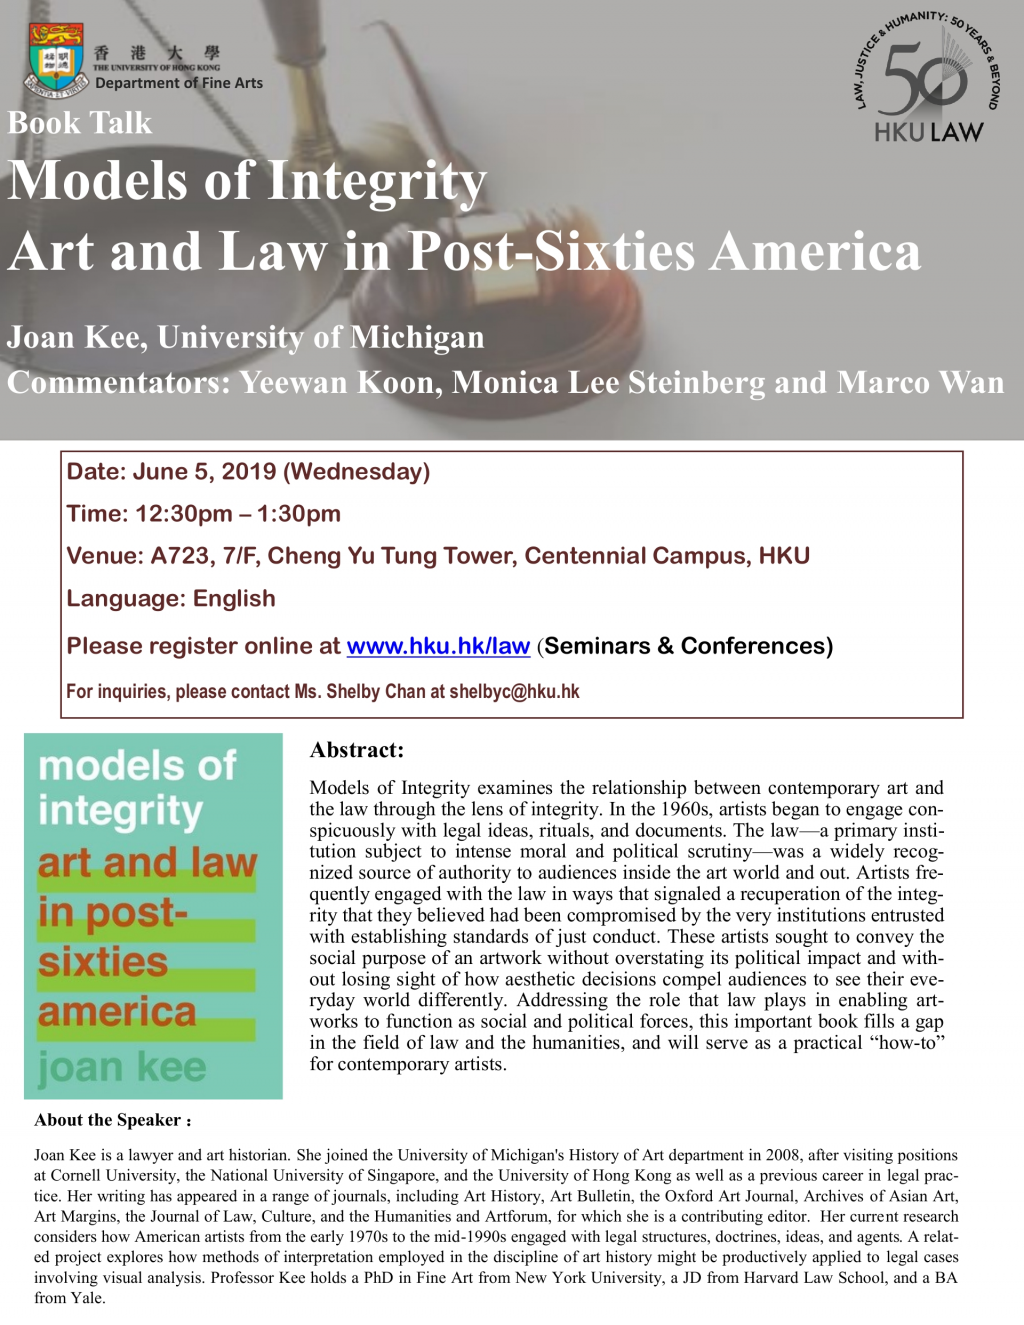 Models of Integrity Art and Law in Post-Sixties America